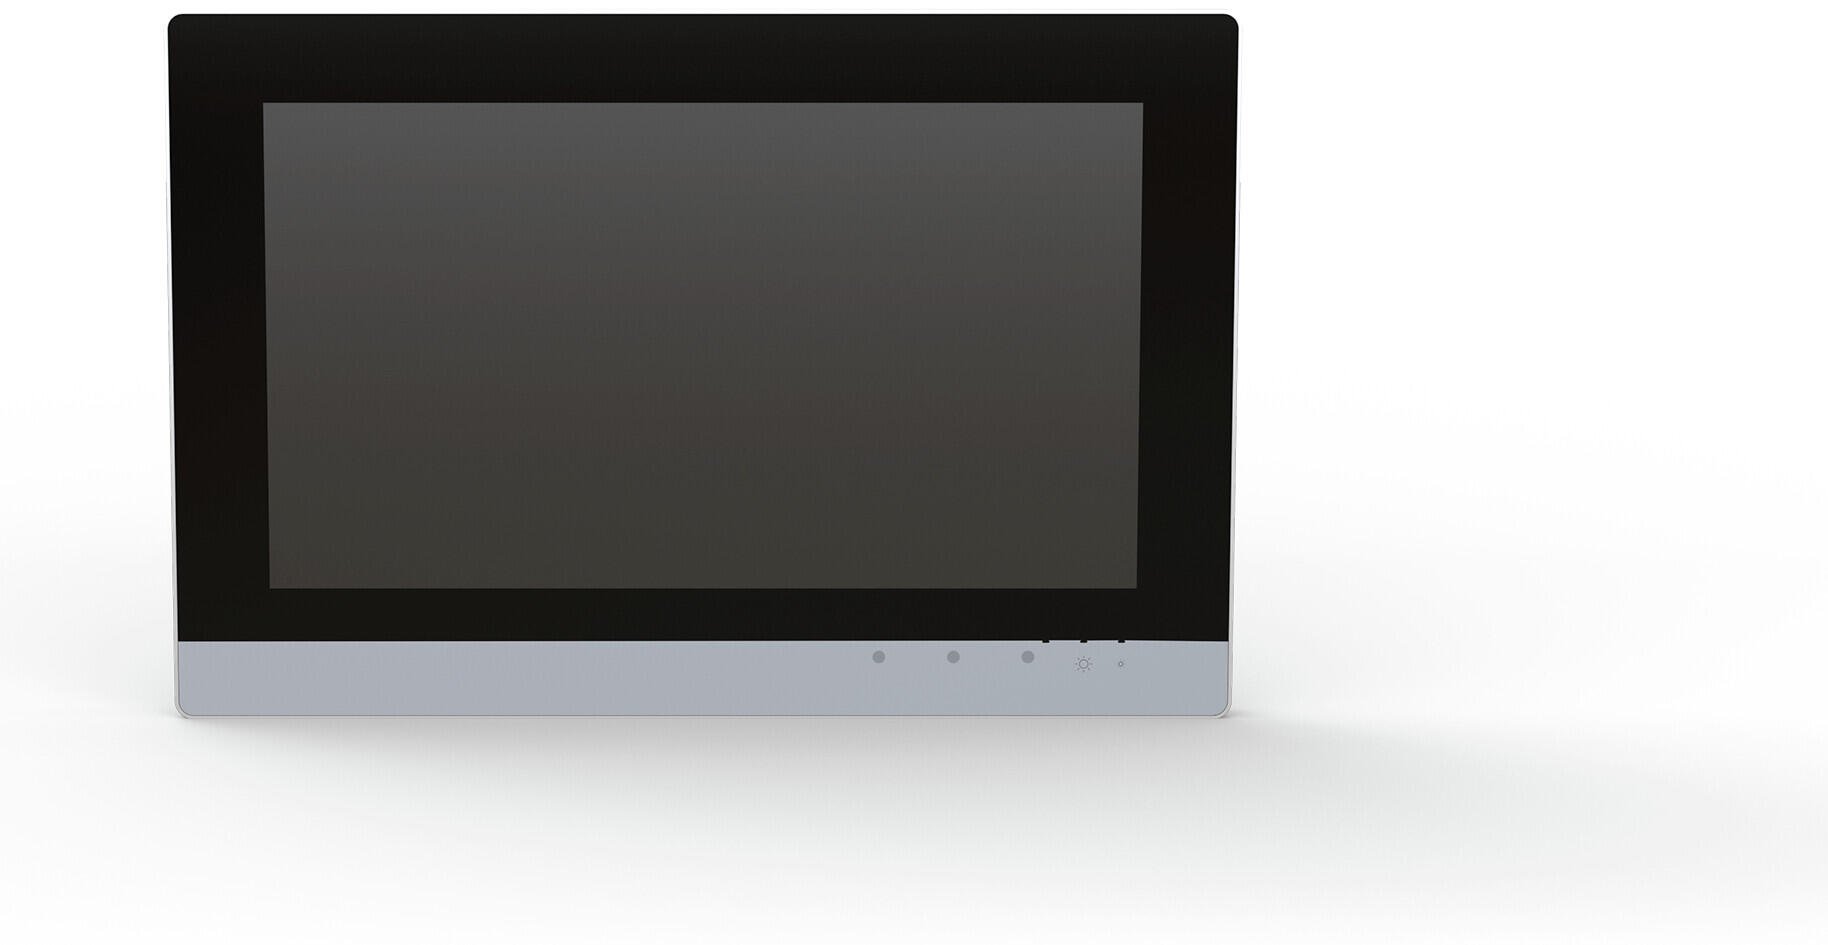 Touch Panel 600; 39,6 cm (15,6“); 1920 x 1080 pixels; 2 x Ethernet, 2 x USB, CAN, DI/DO, RS-232/485, audio; Control Panel